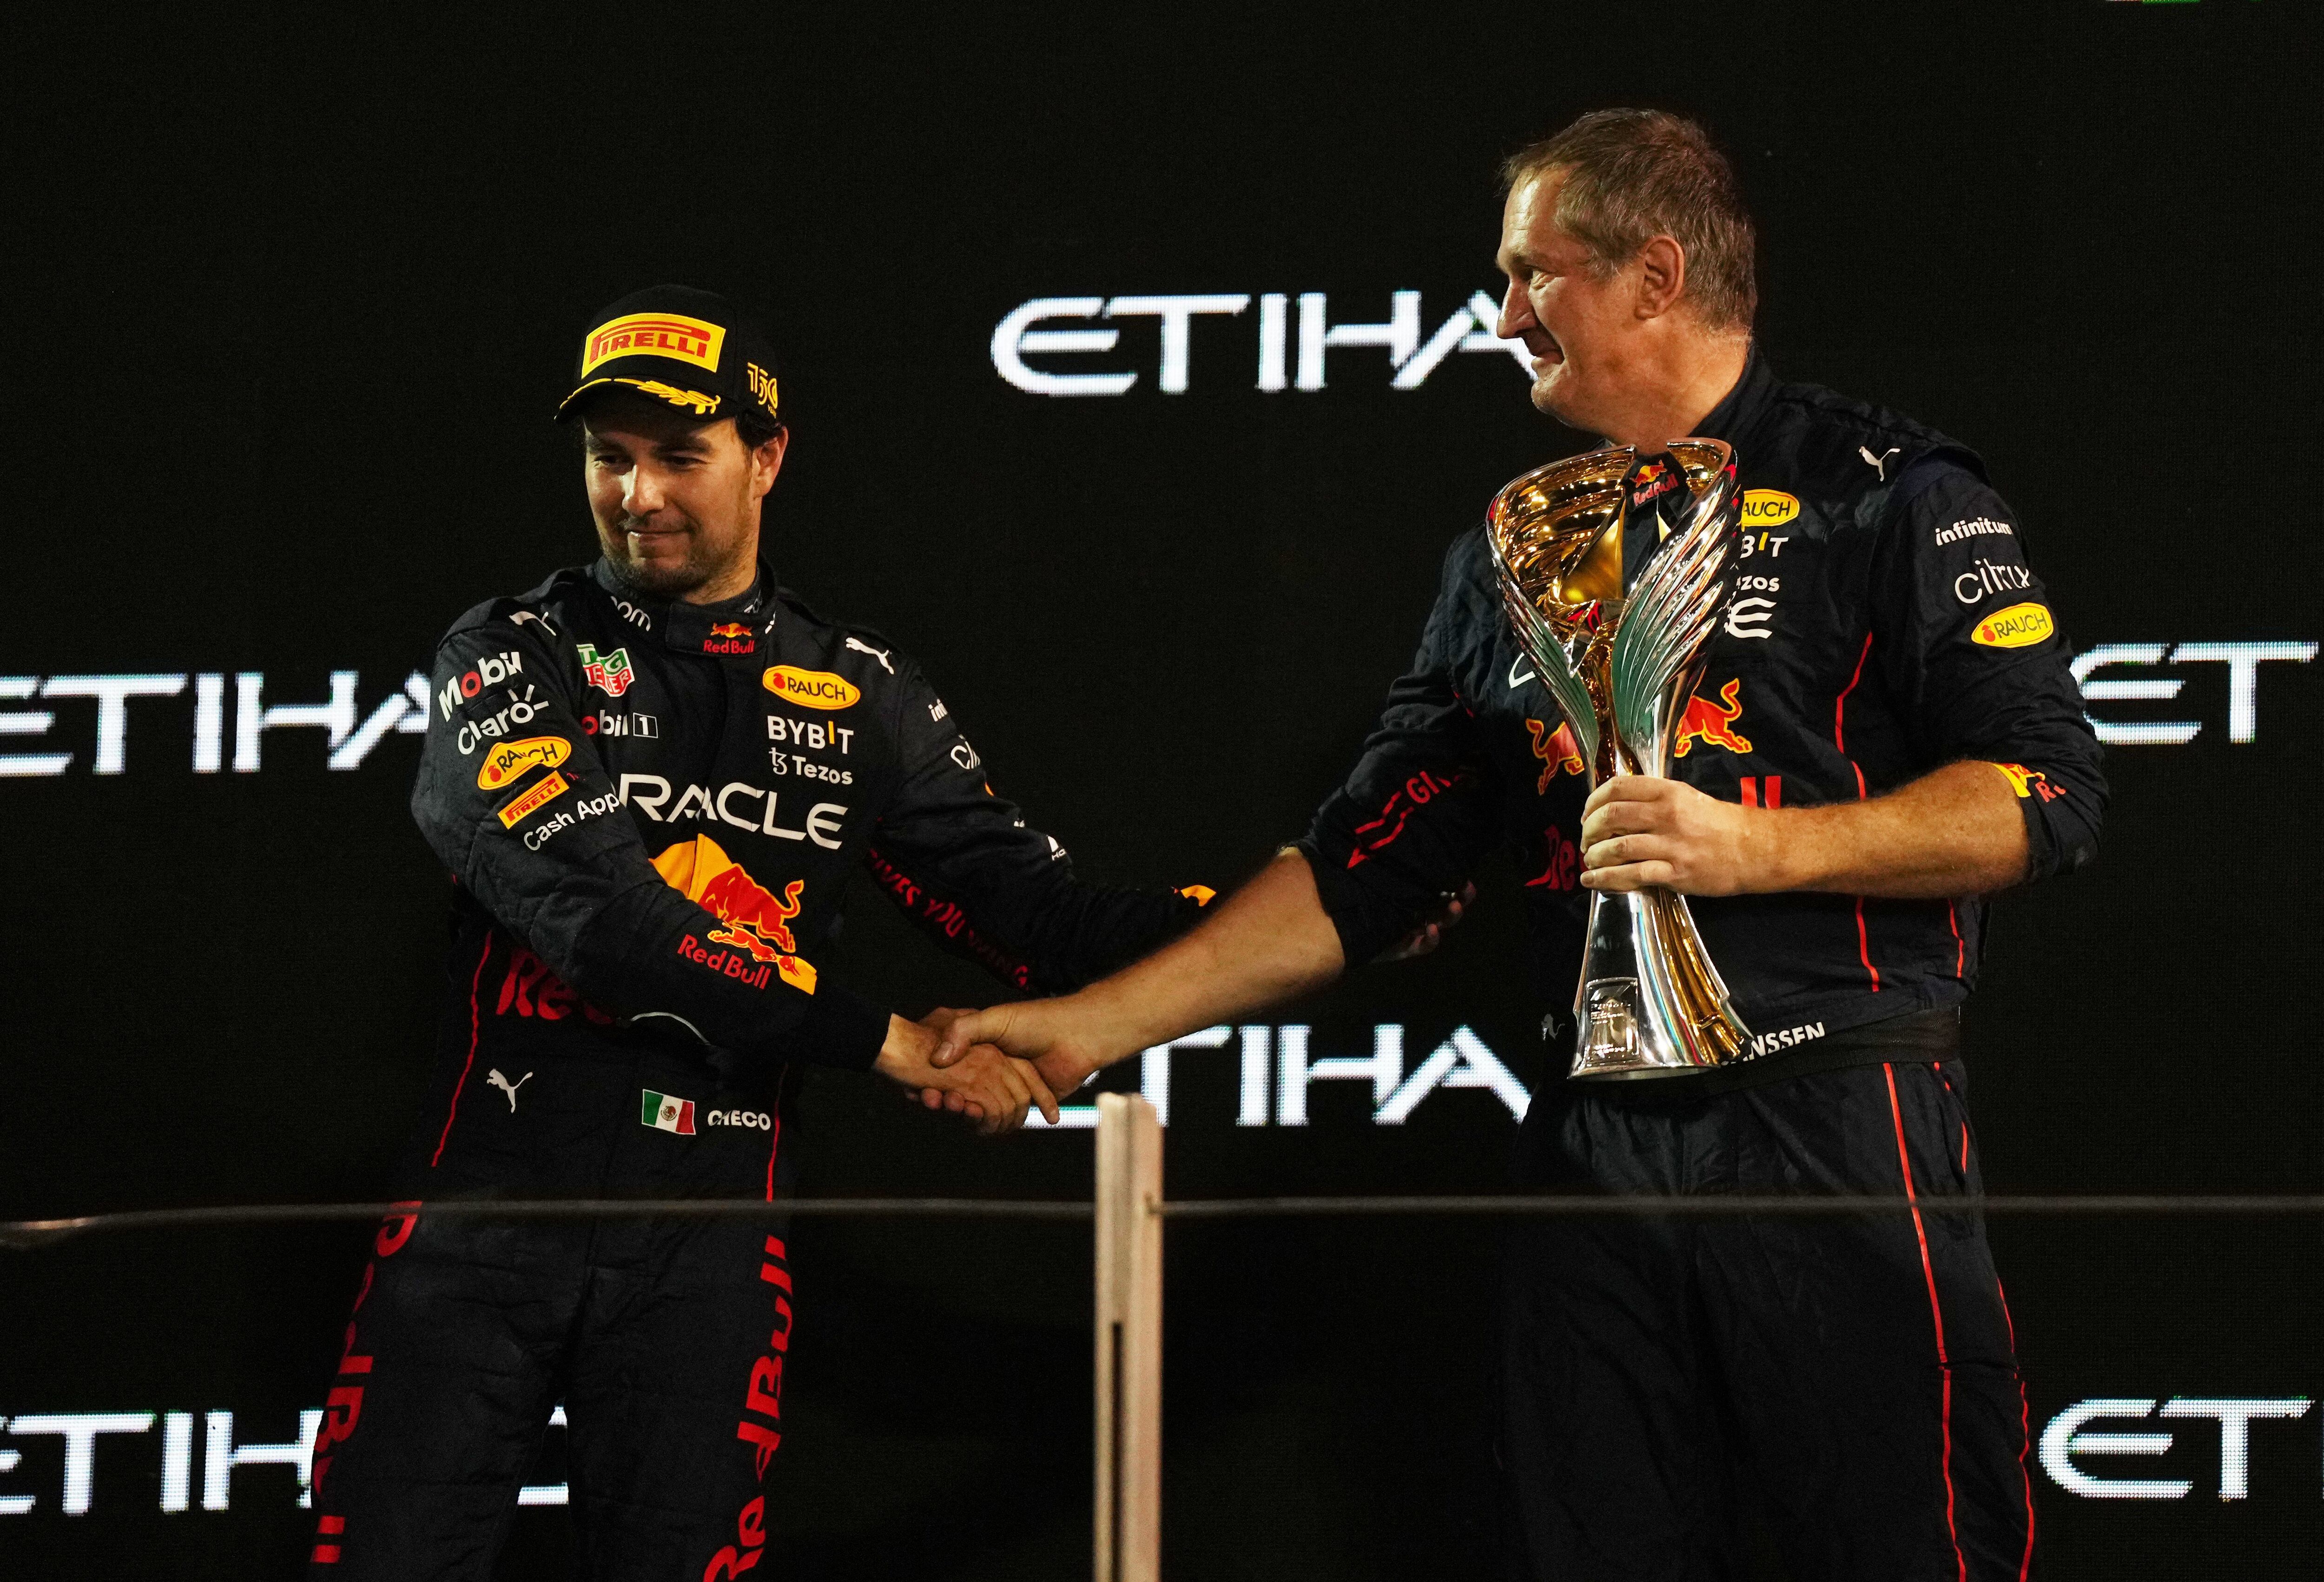 Formula One F1 - Abu Dhabi Grand Prix - Yas Marina Circuit, Abu Dhabi, United Arab Emirates - November 20, 2022 Red Bull's trackside Infrastructure Group Leader Olaf Janssen hold the constructors winner trophy on the podium as he shakes hands with third placed Red Bull's Sergio Perez REUTERS/Aleksandra Szmigiel